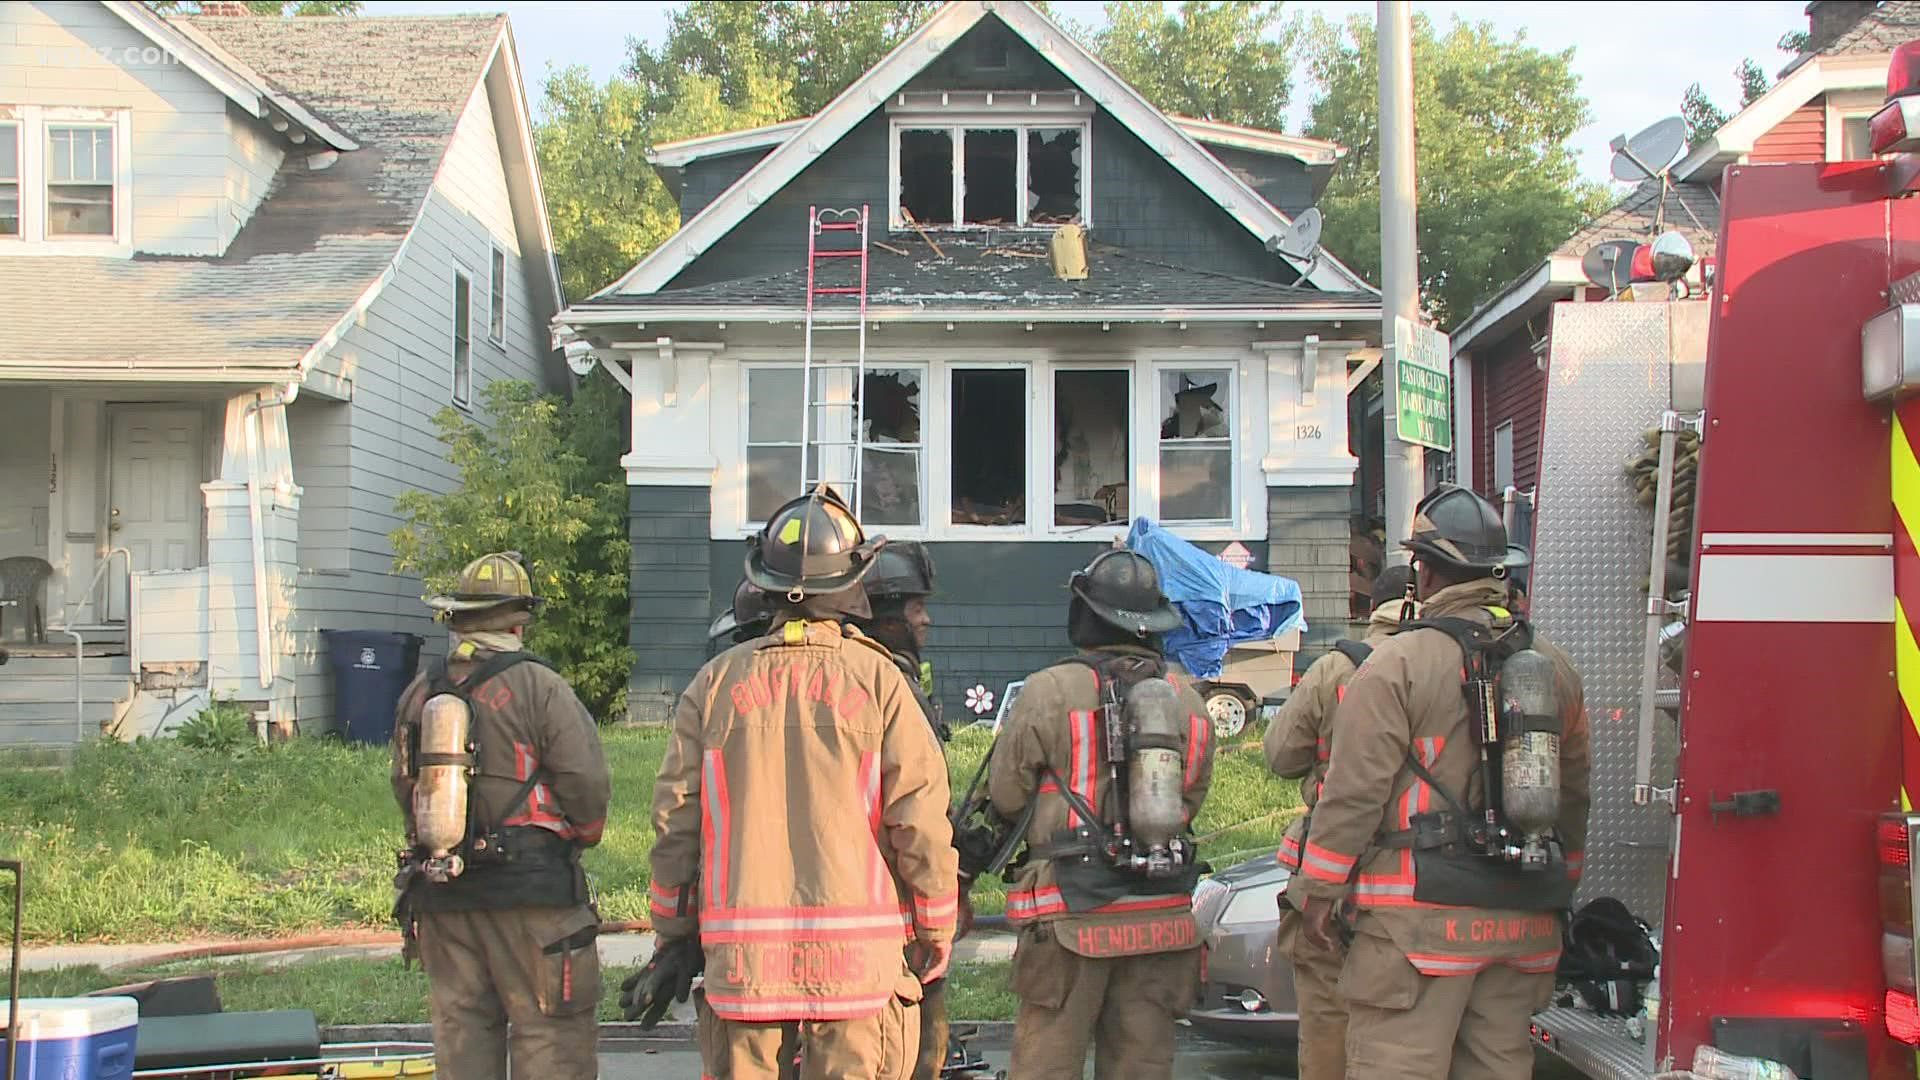 Investigators say the fire started in the basement of this home causing around 165-thousand dollars in damages.